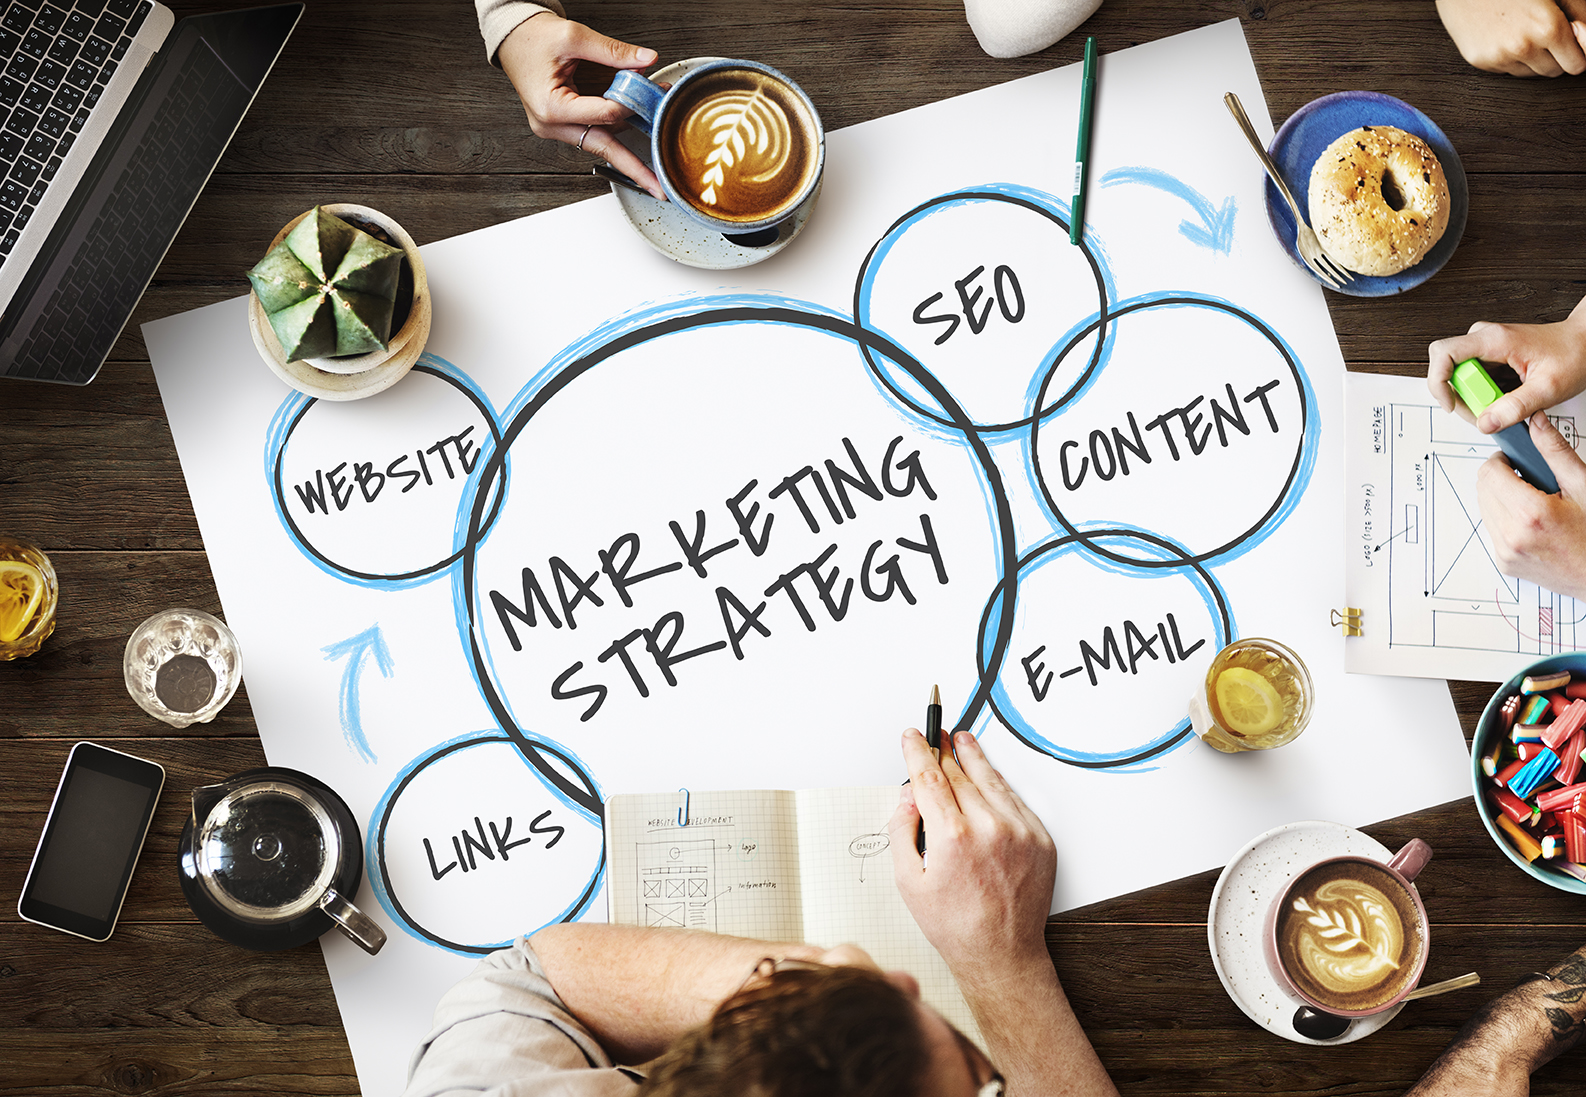 Learn How to Build an Effective, Modern Digital Marketing Strategy